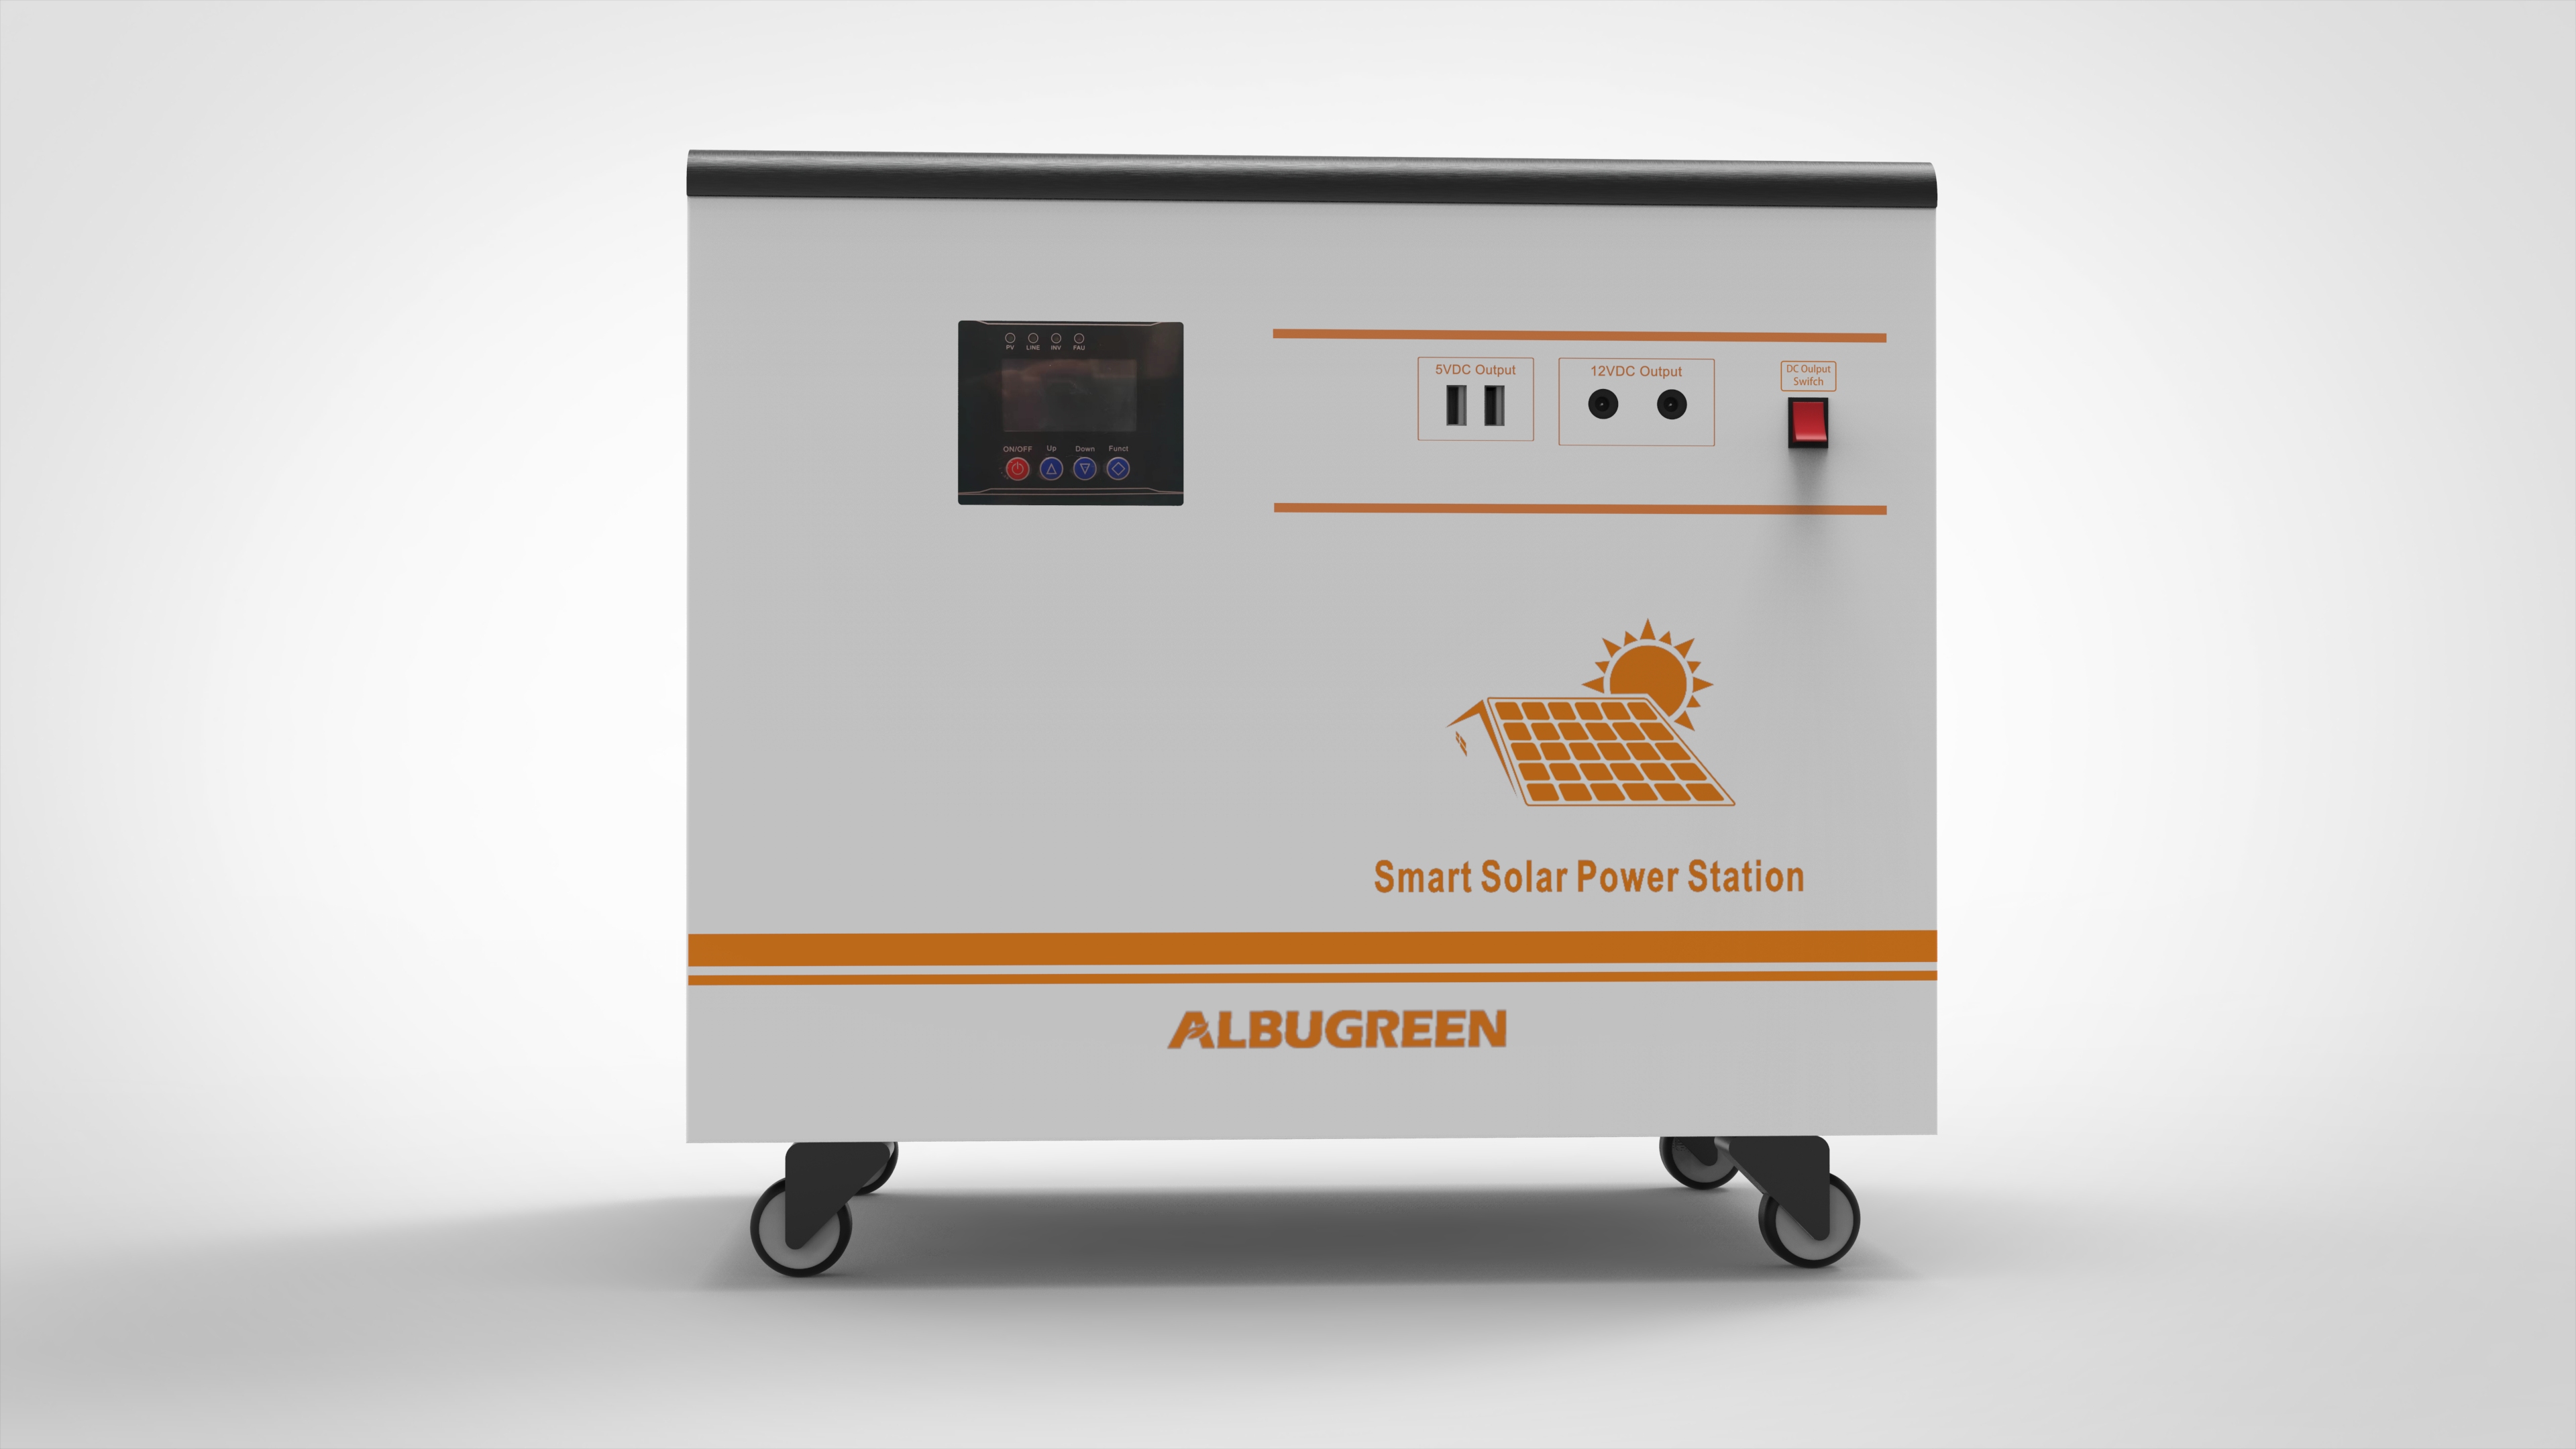 3000w 220v with Inverter in One Solar Power System for The Home